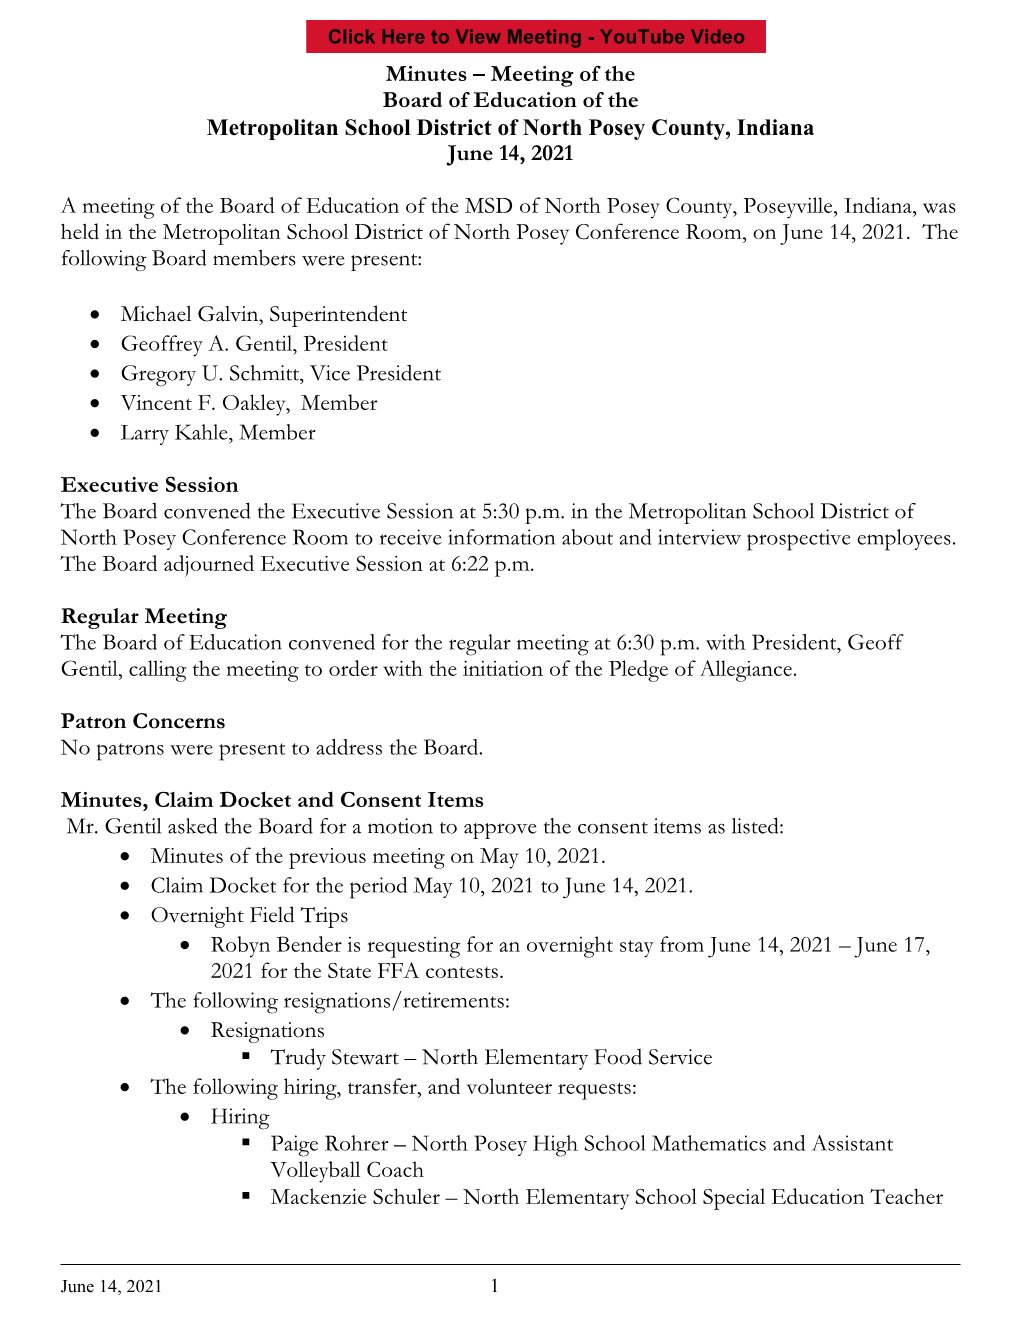 Minutes – Meeting of the Board of Education of the Metropolitan School District of North Posey County, Indiana June 14, 2021 A